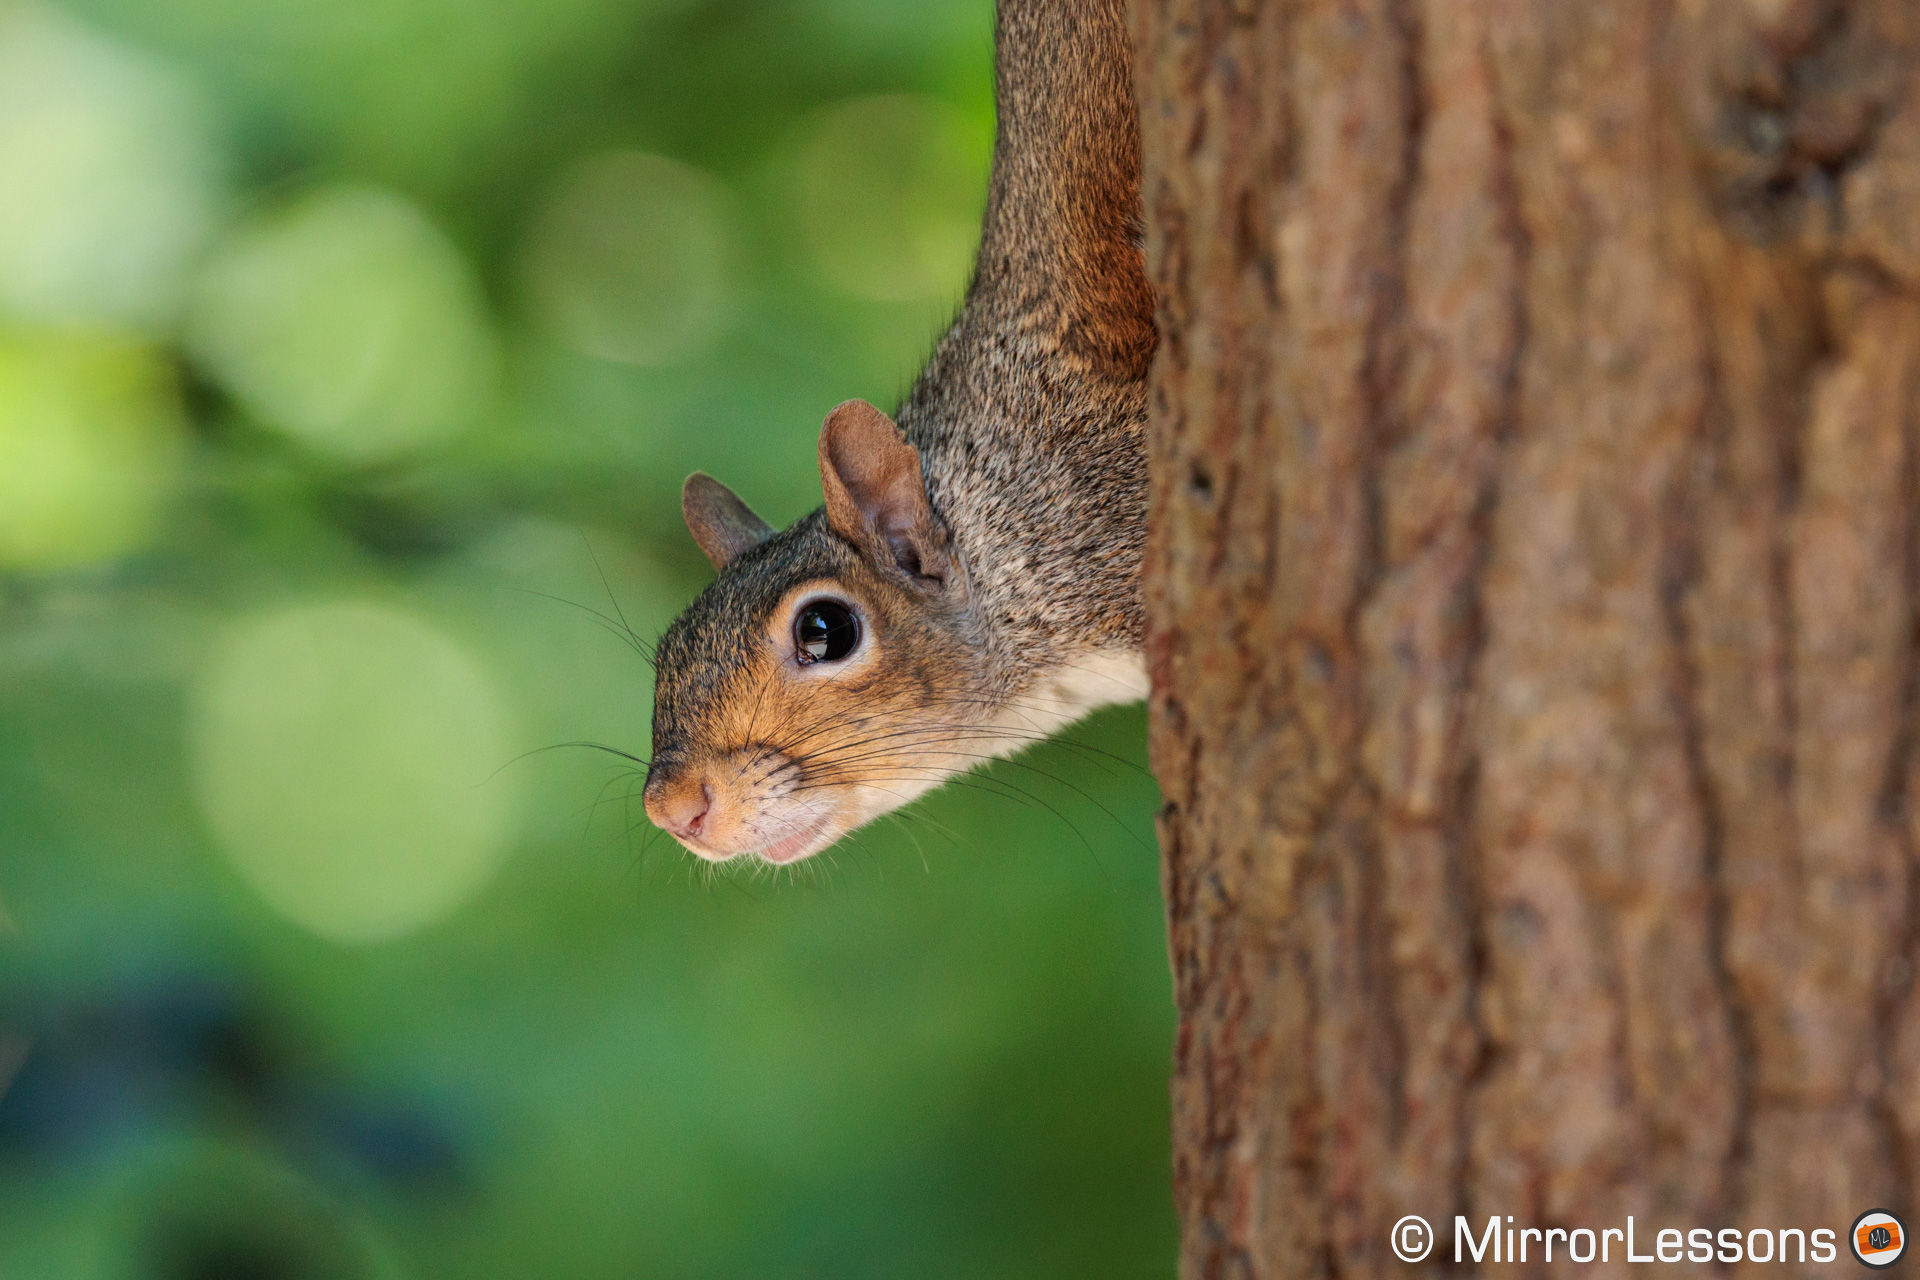 Gray squirrel behind a tree, close-up on its head